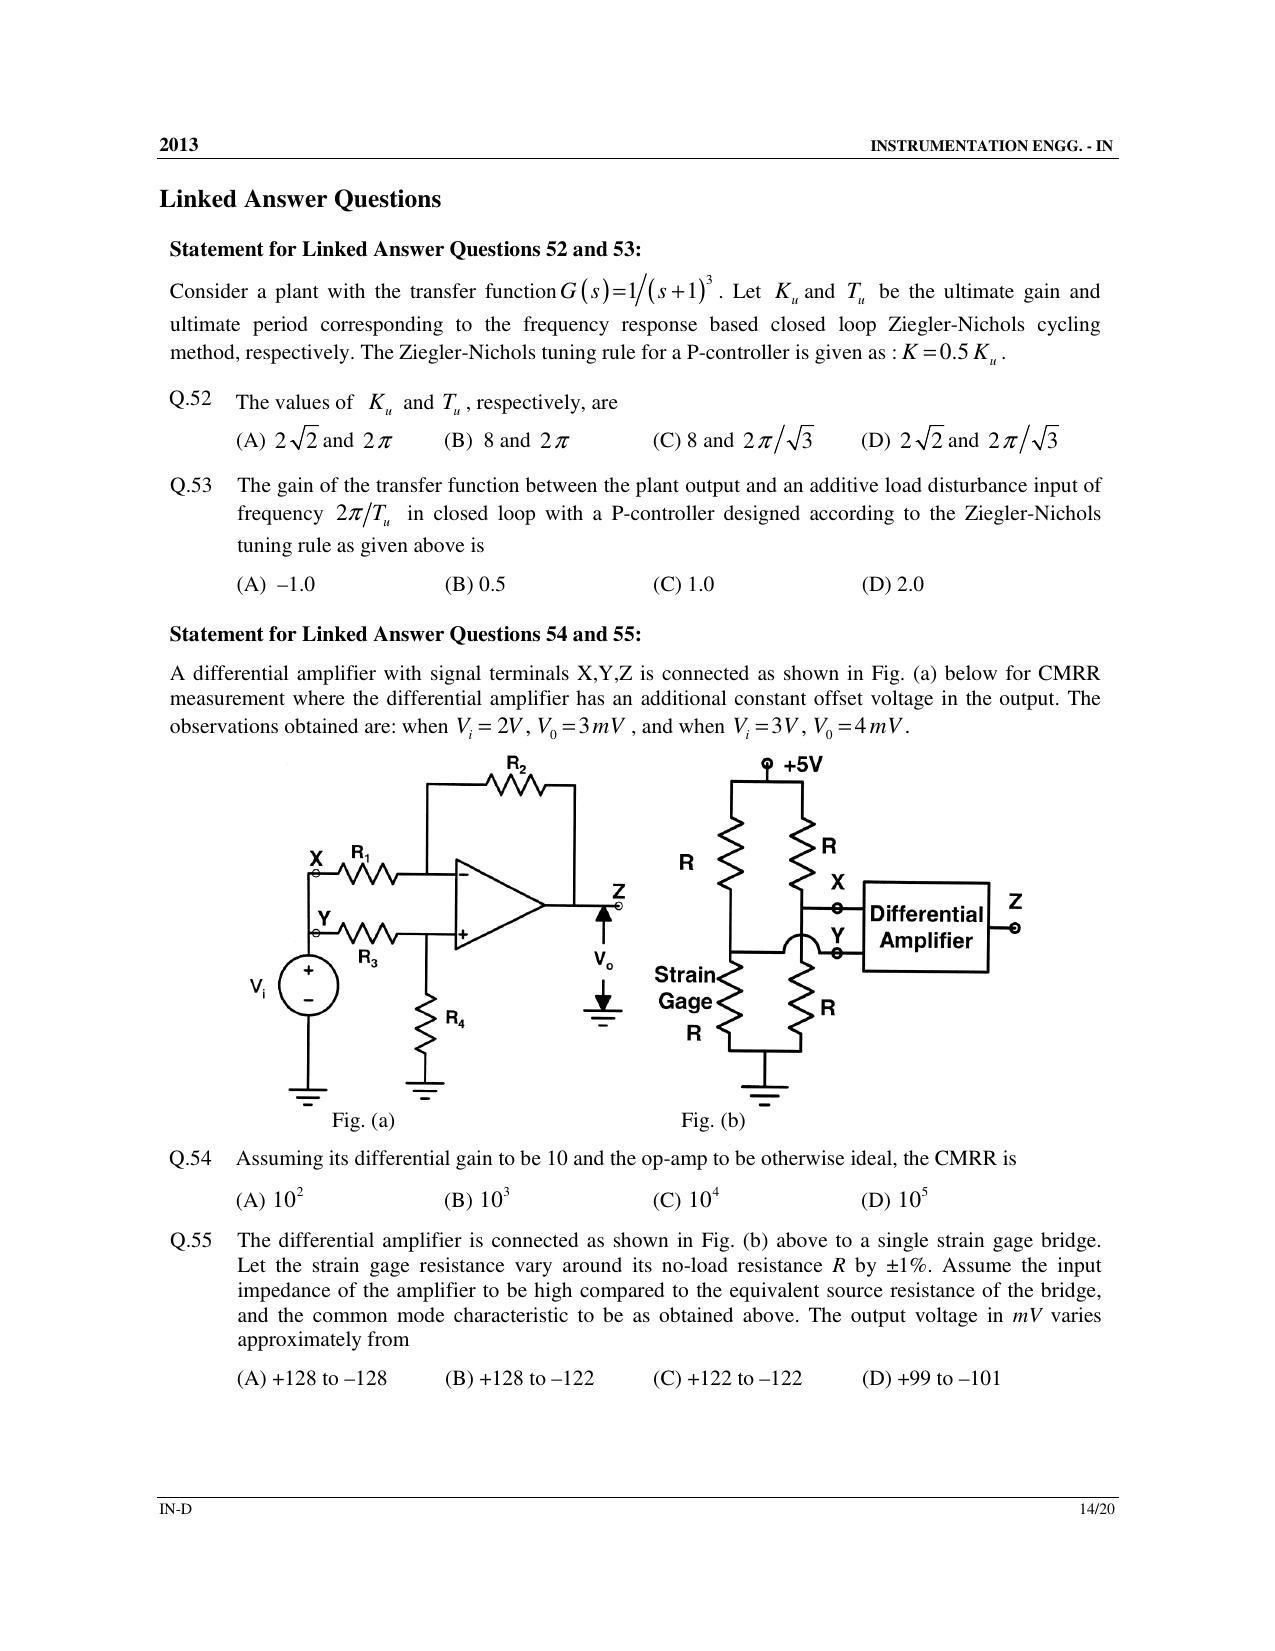 GATE 2013 Instrumentation Engineering (IN) Question Paper with Answer Key - Page 66